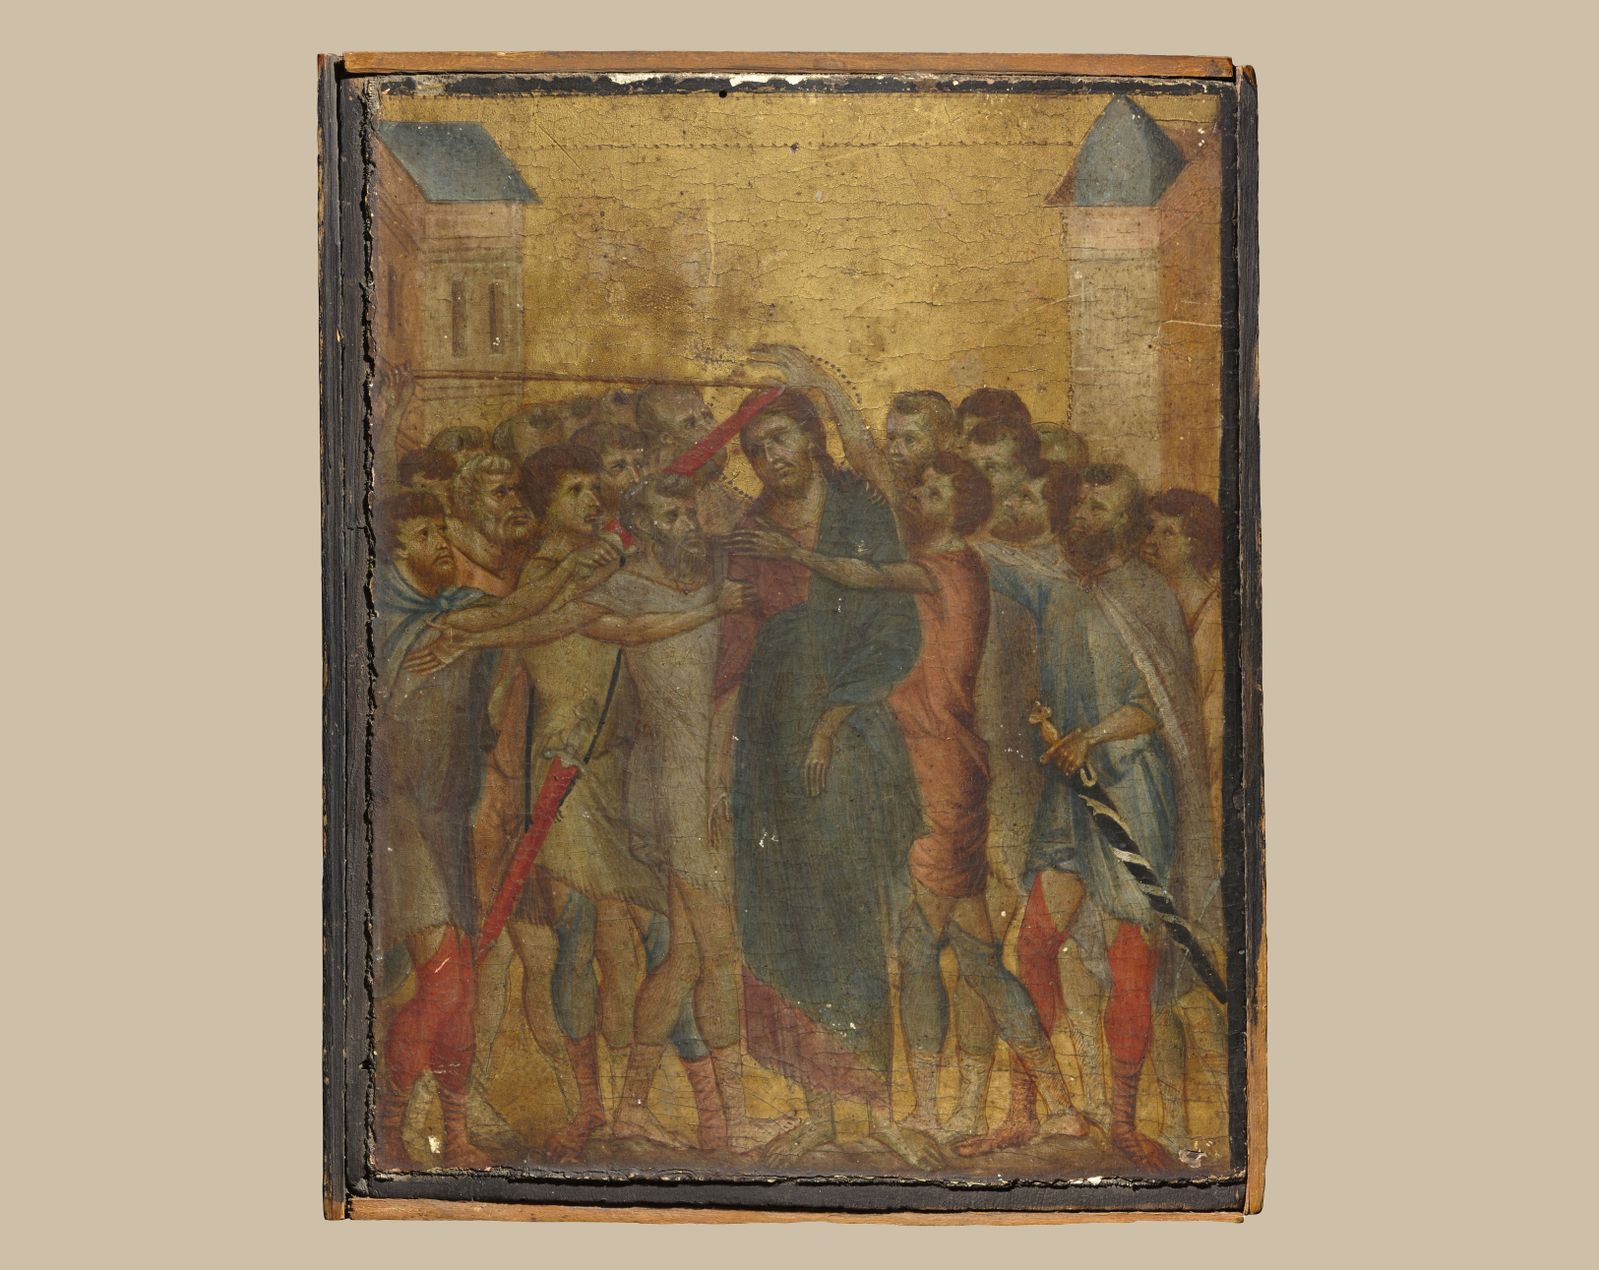 After a long and circuitous journey, the Louvre has acquired Christ Mocked, a 13th-century work by the Florentine painter Cimabue. The 10- by 8-inch